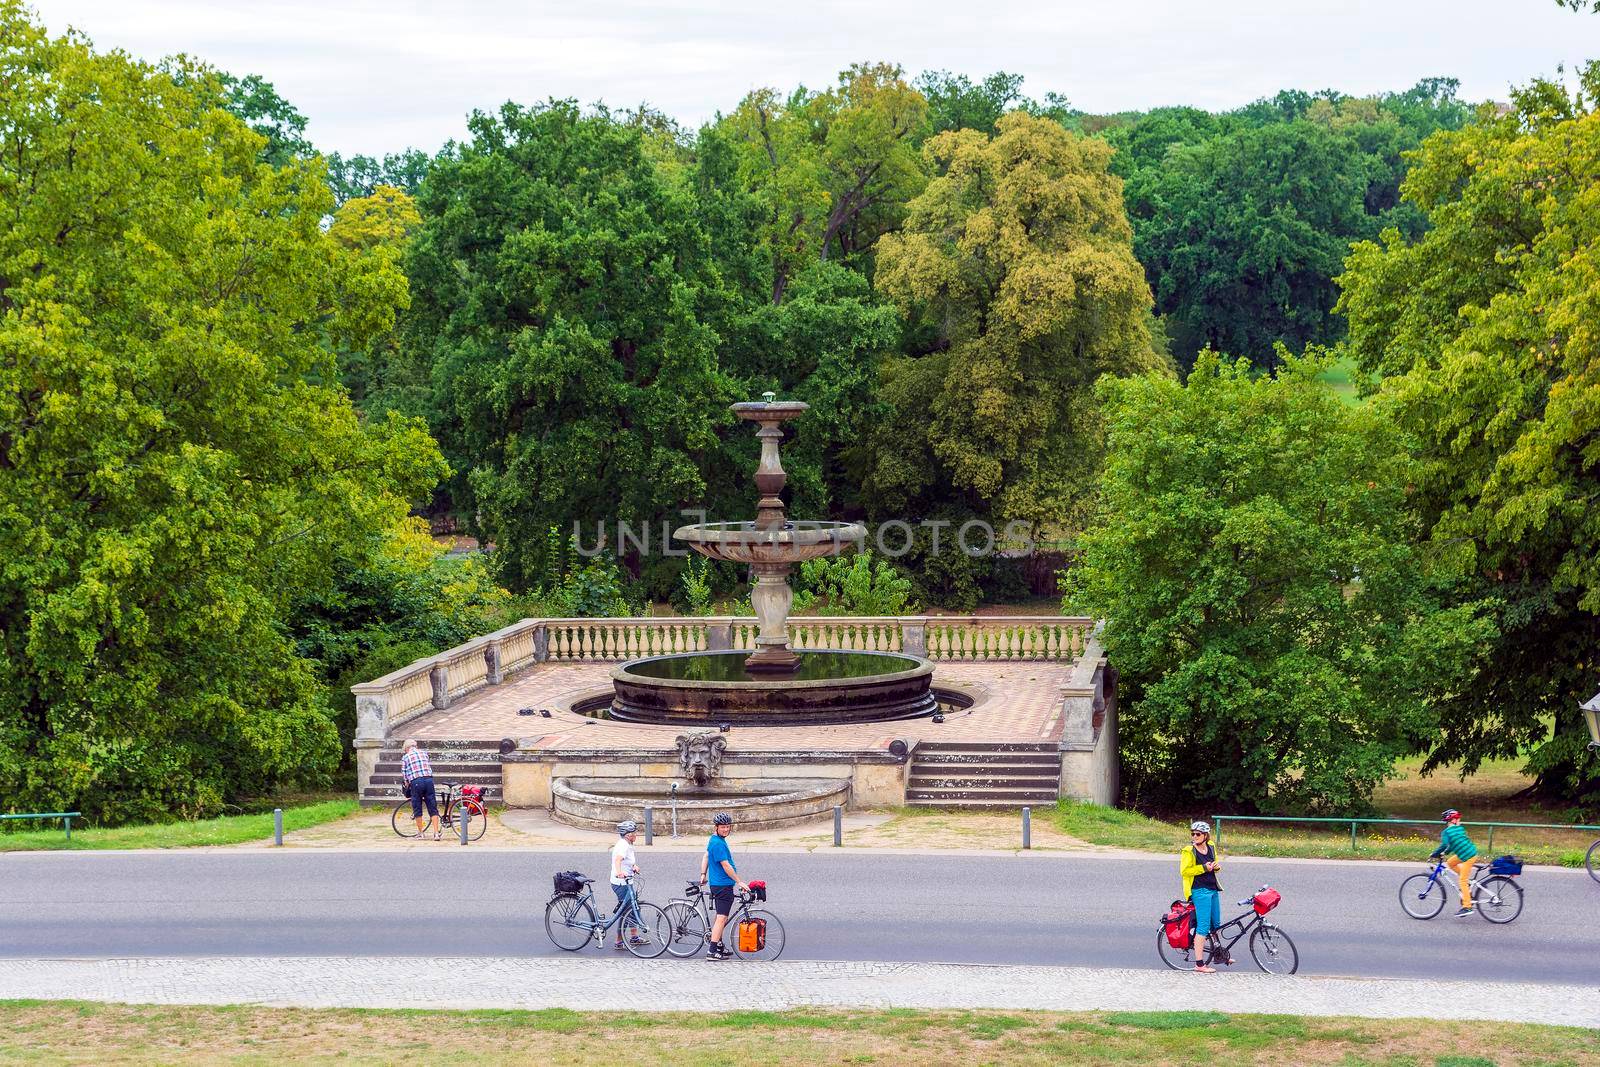 Berlin, Germany - August 17 2019: View of the Rossbrunnen fountain in Sanssouci park in Potsdam, Germany